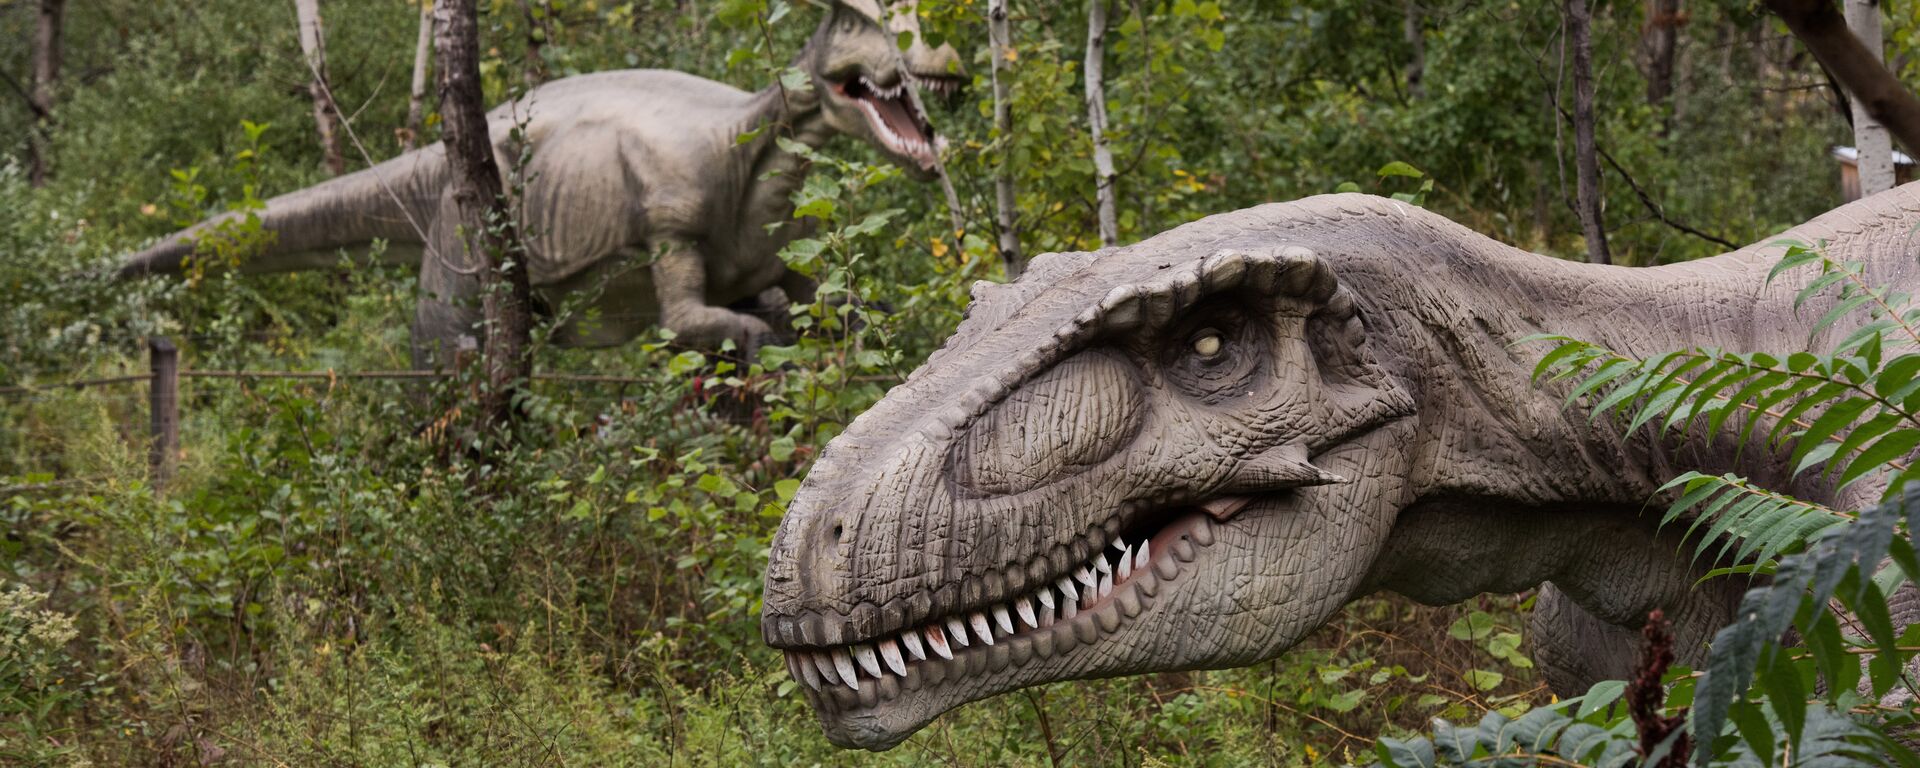 Life-sized animatronic dinosaurs are seen at Field Station: Dinosaurs, a 20-acre outdoor Jurassic learning expedition and family tourist attraction in Secaucus, N.J. on Thursday, Sept. 25, 2014 - Sputnik Mundo, 1920, 02.07.2021